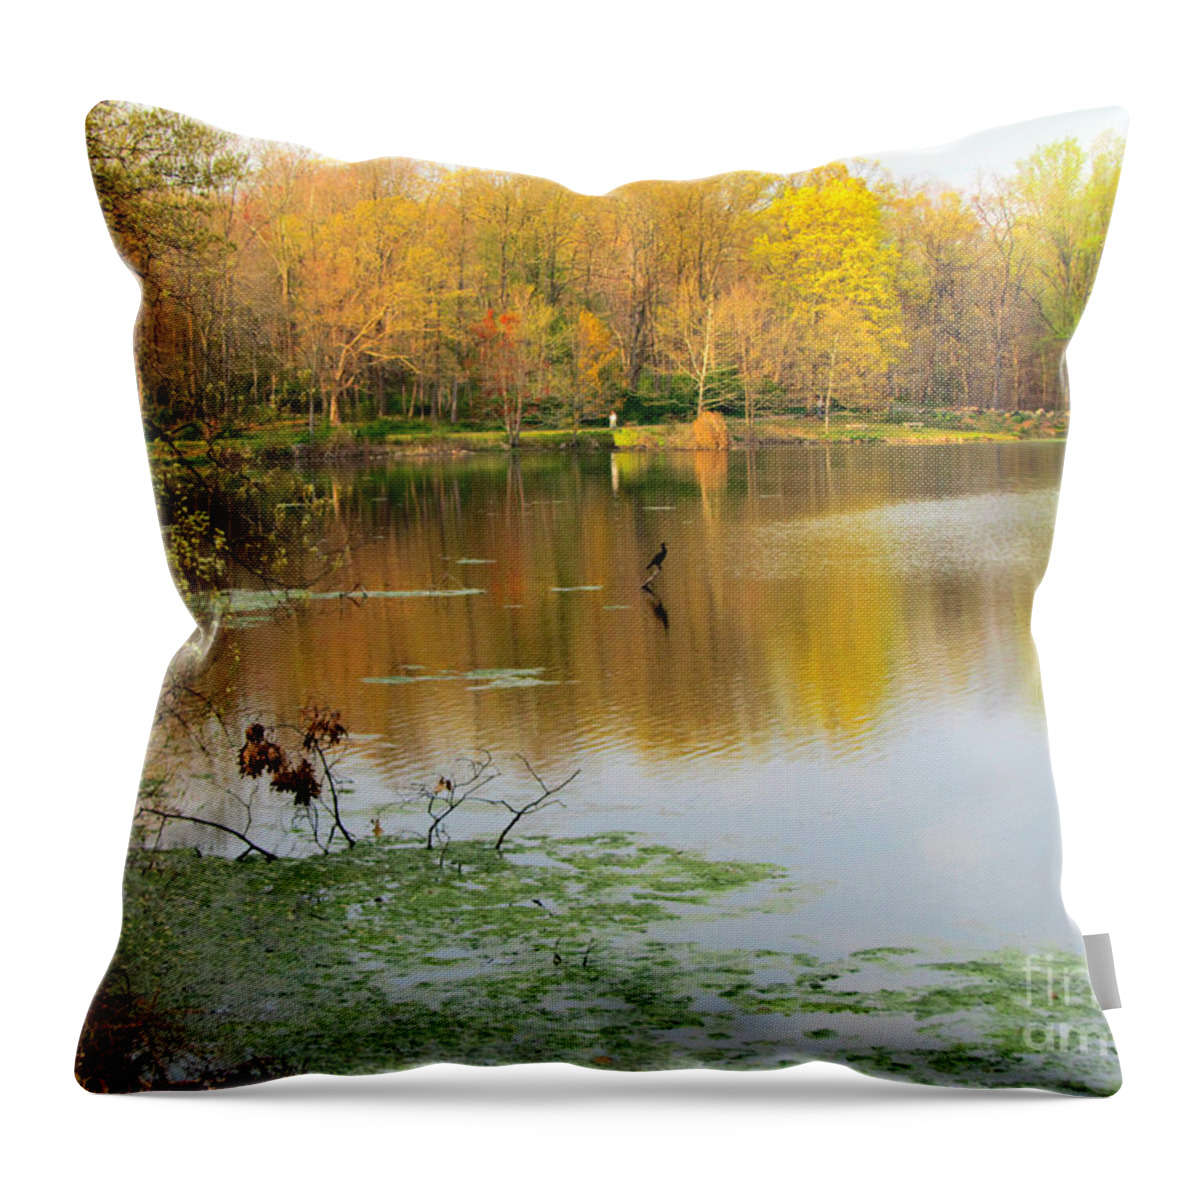  America Throw Pillow featuring the photograph Walking on a Fall Day by Avis Noelle